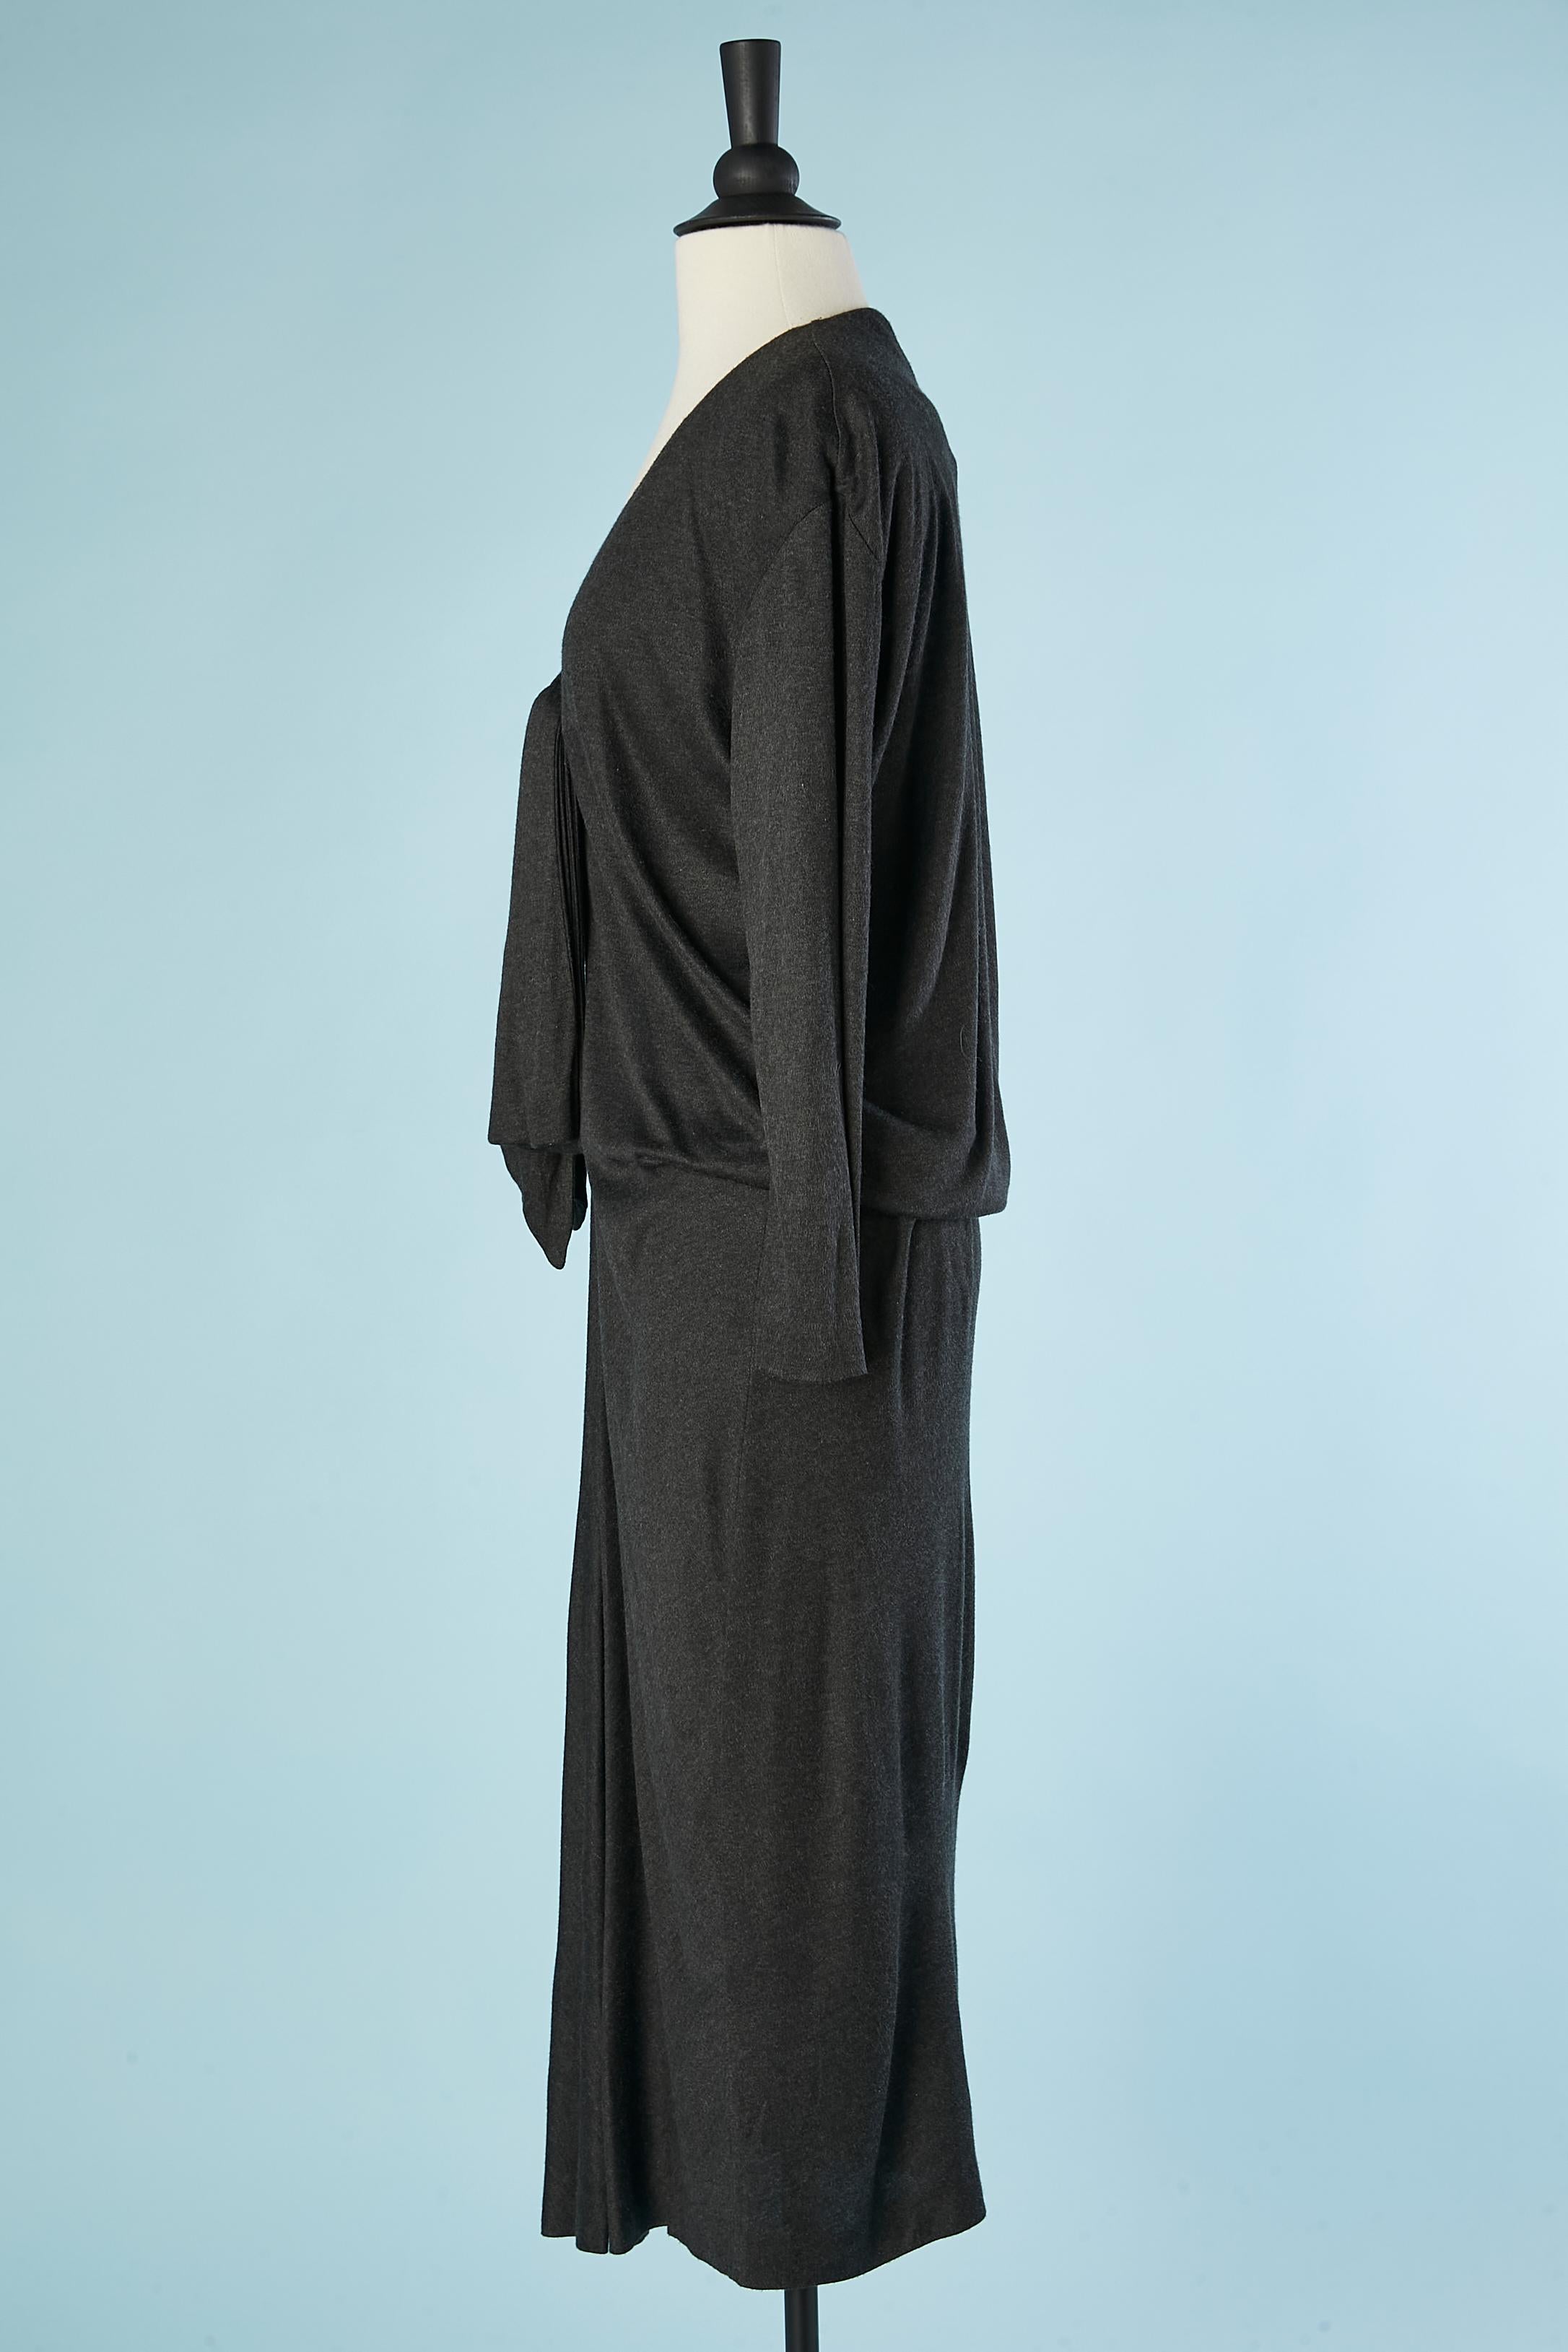 Black Anthracite drape jersey dress with bow in the middle front Yves Saint Laurent  For Sale